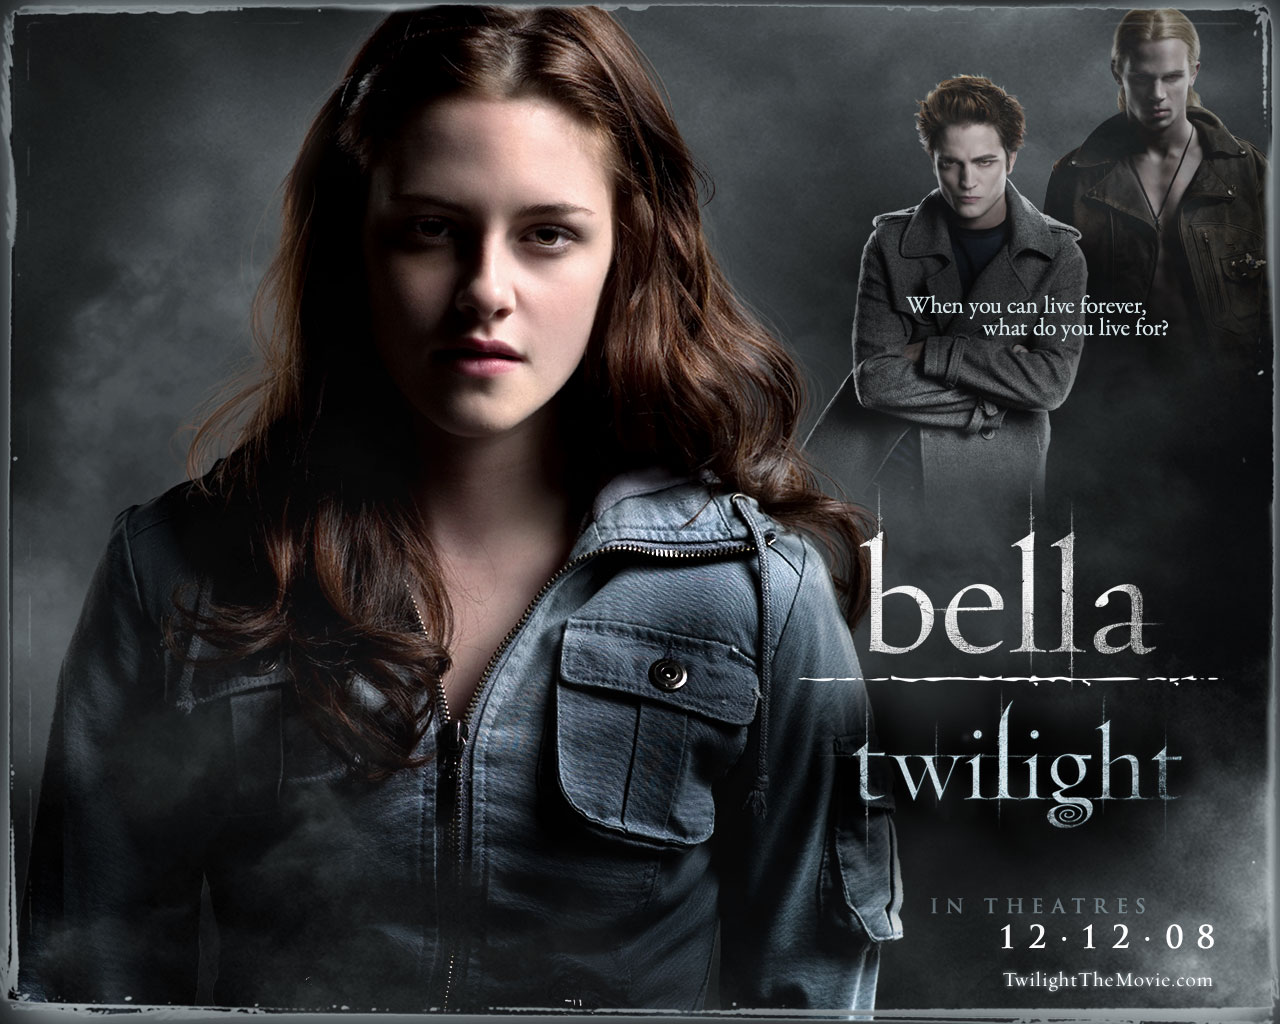 Download High quality Twilight wallpaper / Movies / 1280x1024